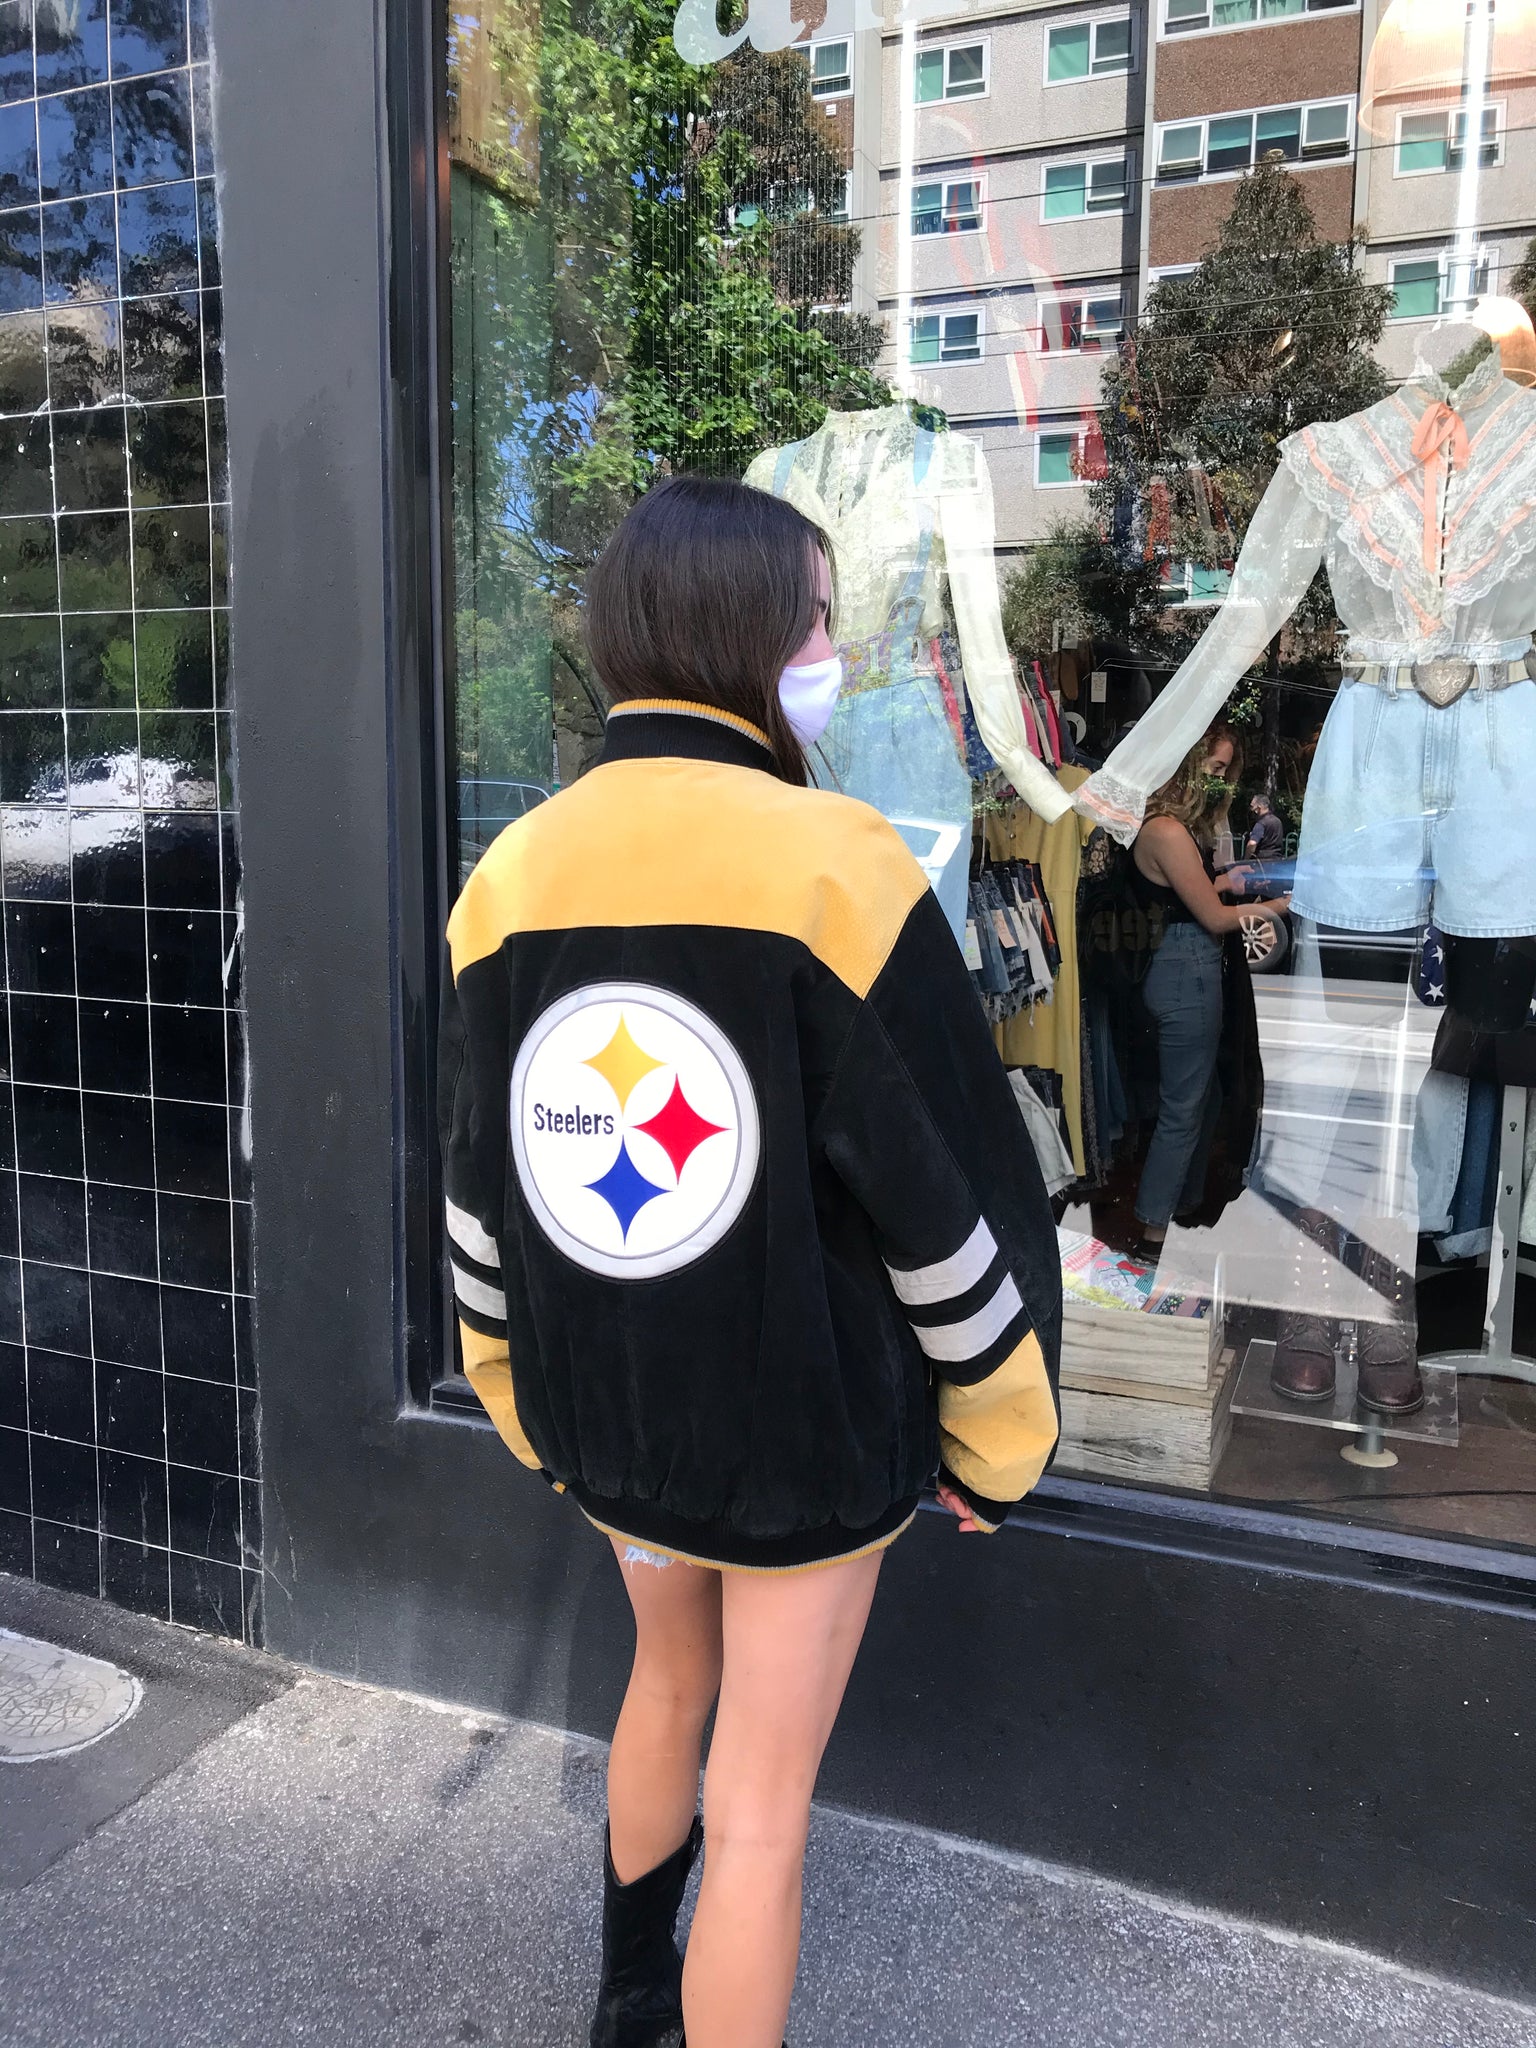 NFL Pittsburgh Steelers Leather Vintage 90’s Bomber Sporting Jacket by G-111 Apparel USA